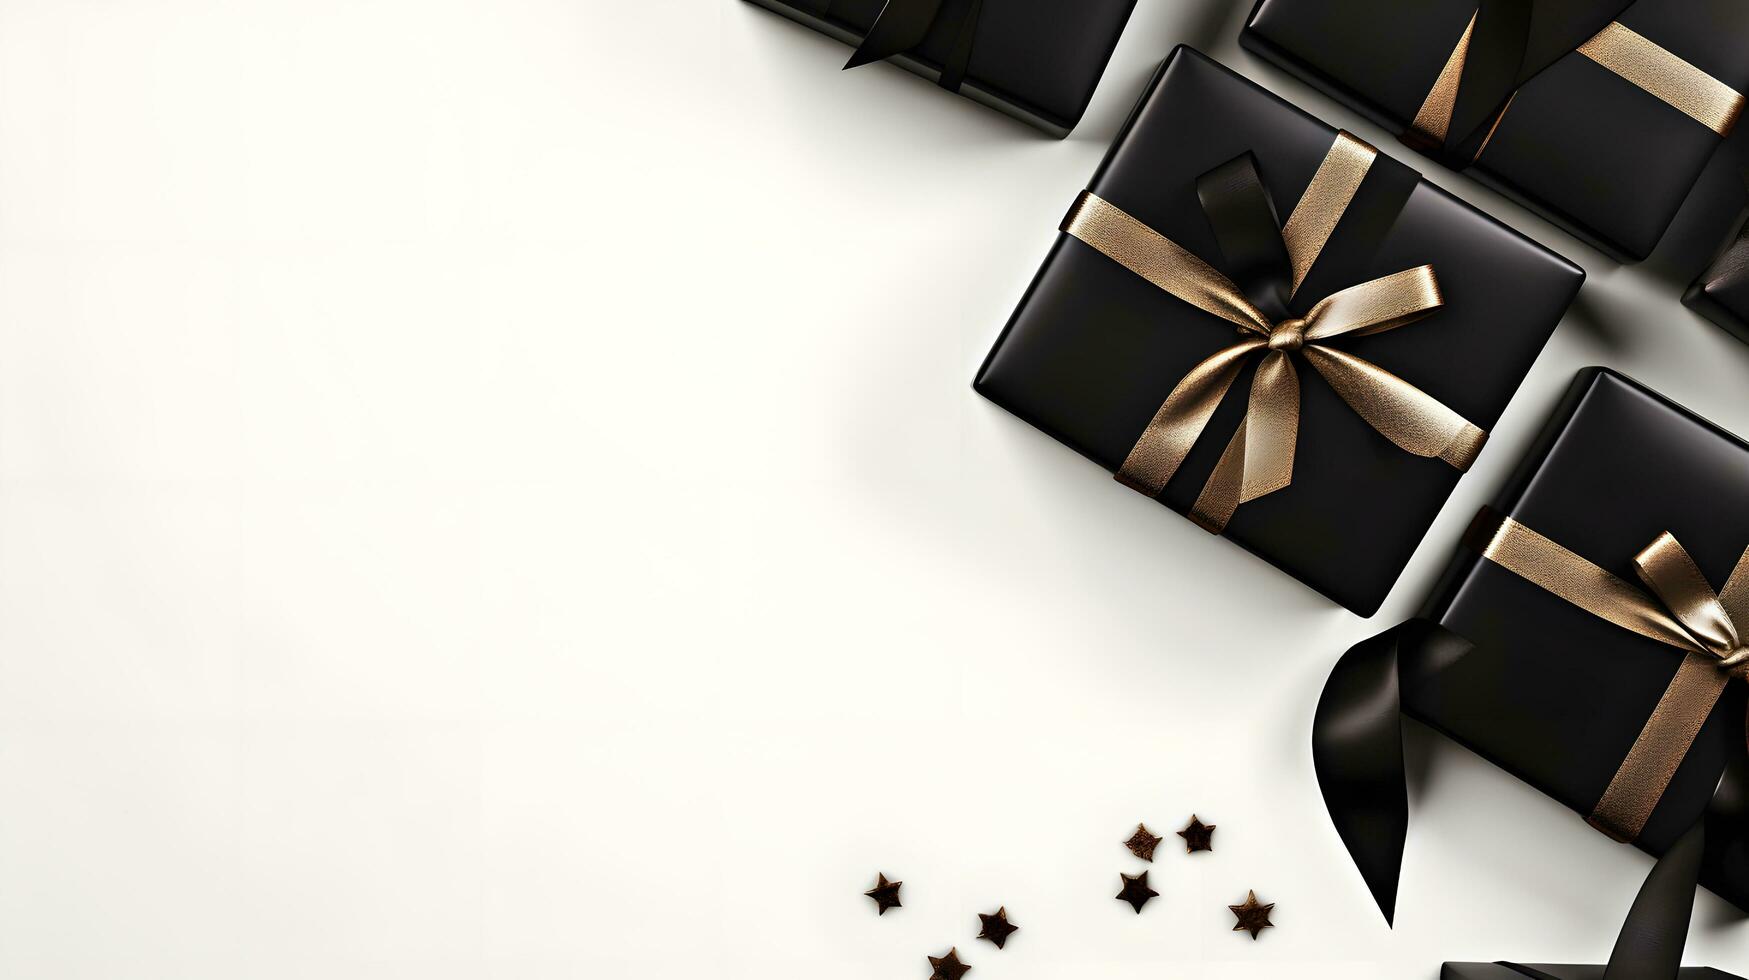 Diagonal Line of Black Gift Boxes with Gold Ribbons and Stars on White Background photo